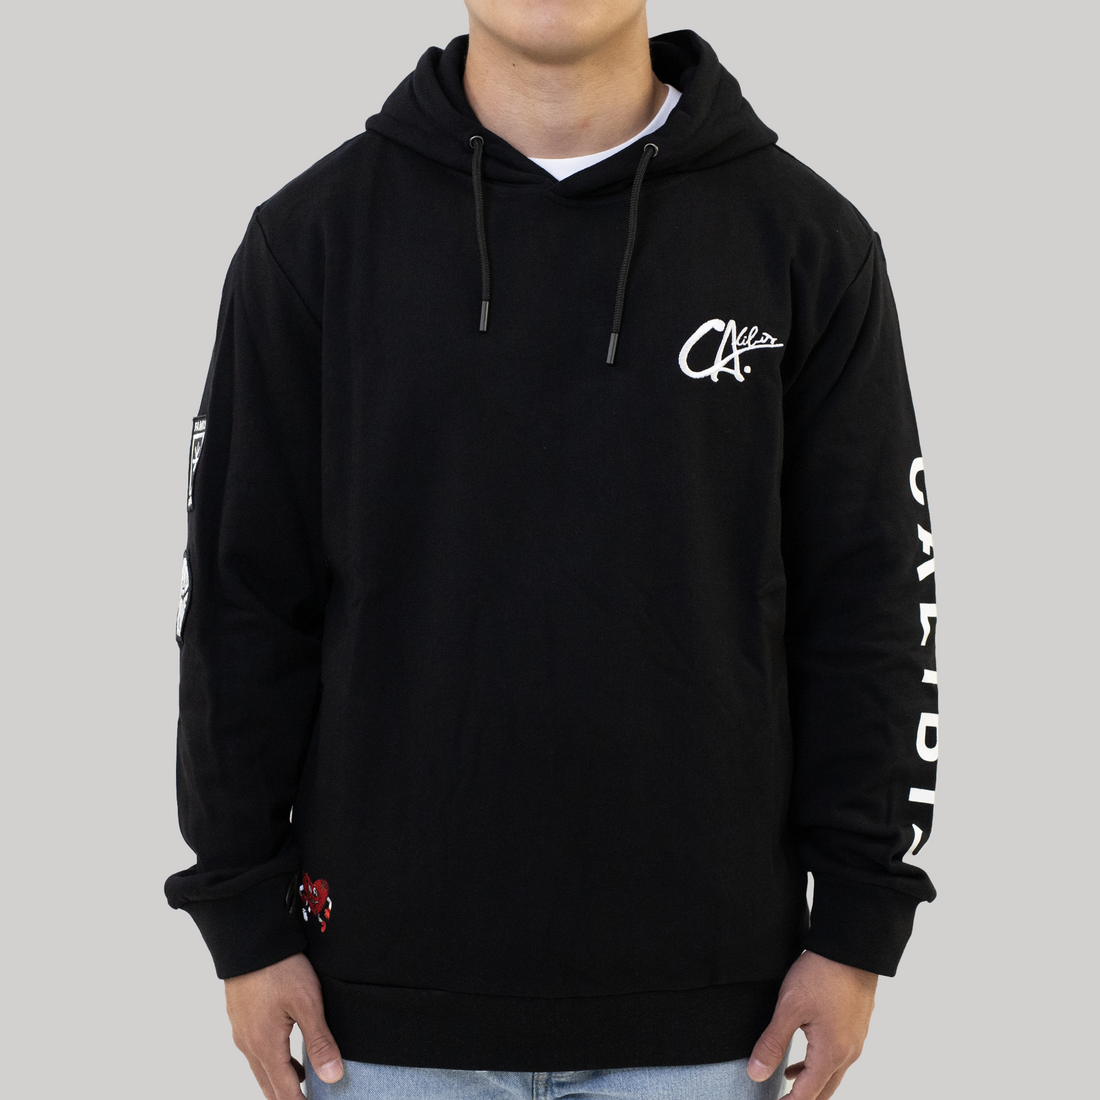 Founded Premium Hoodie